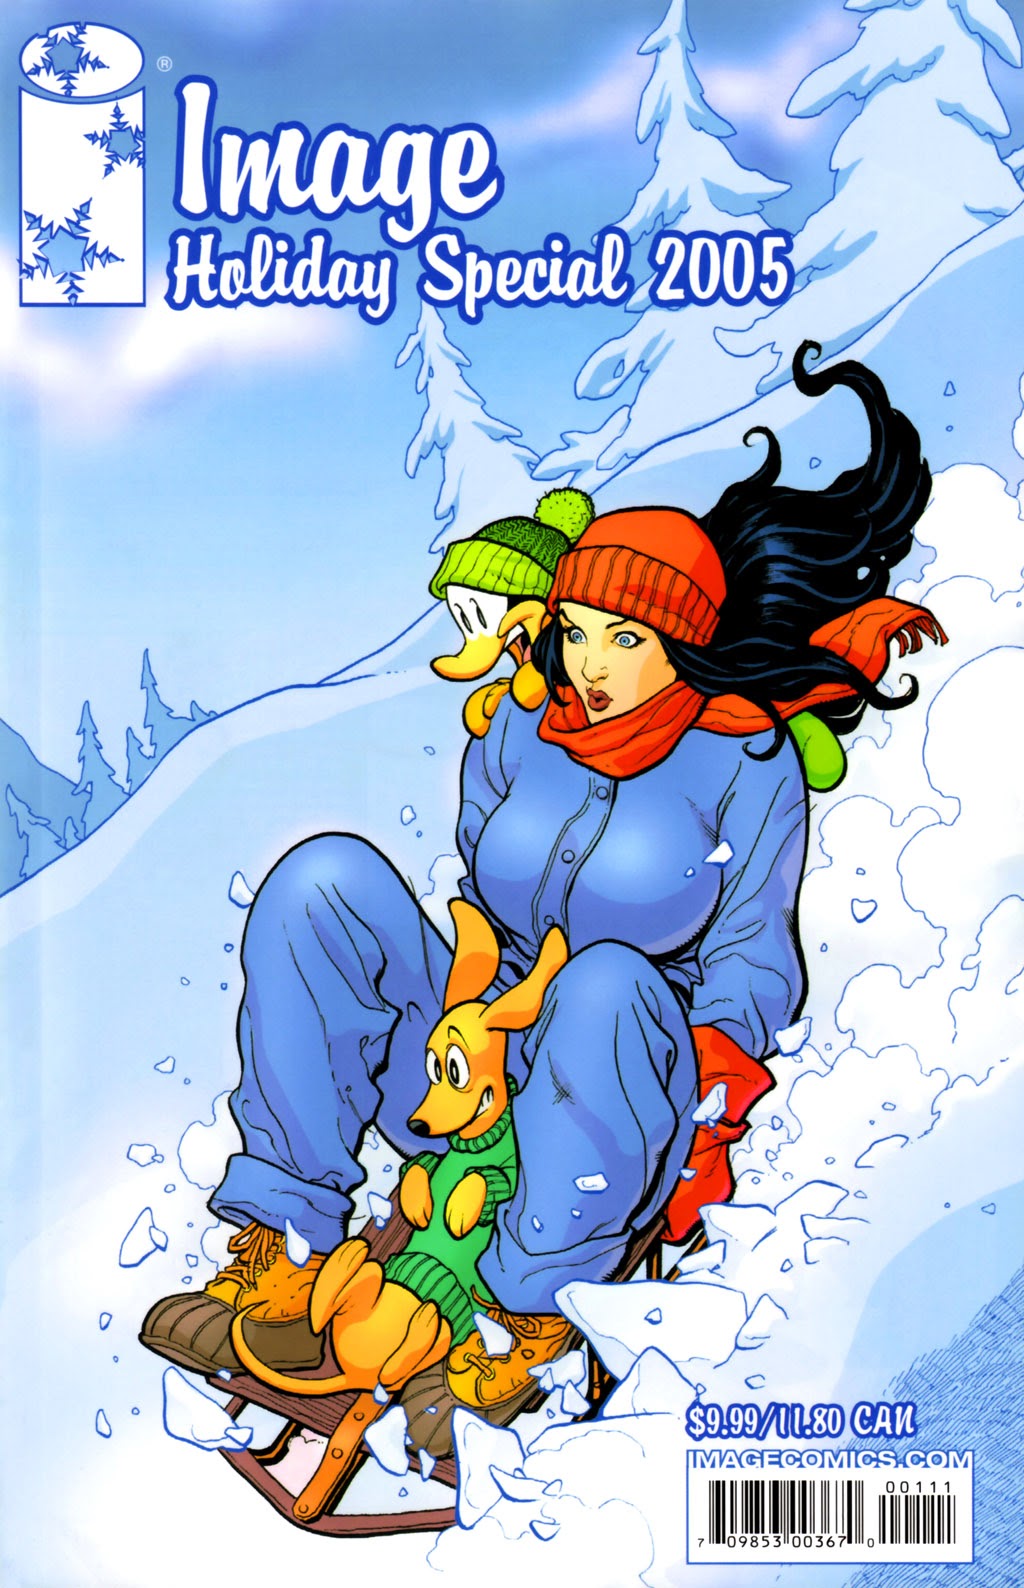 Read online Image Holiday Special 2005 comic -  Issue # TPB - 1